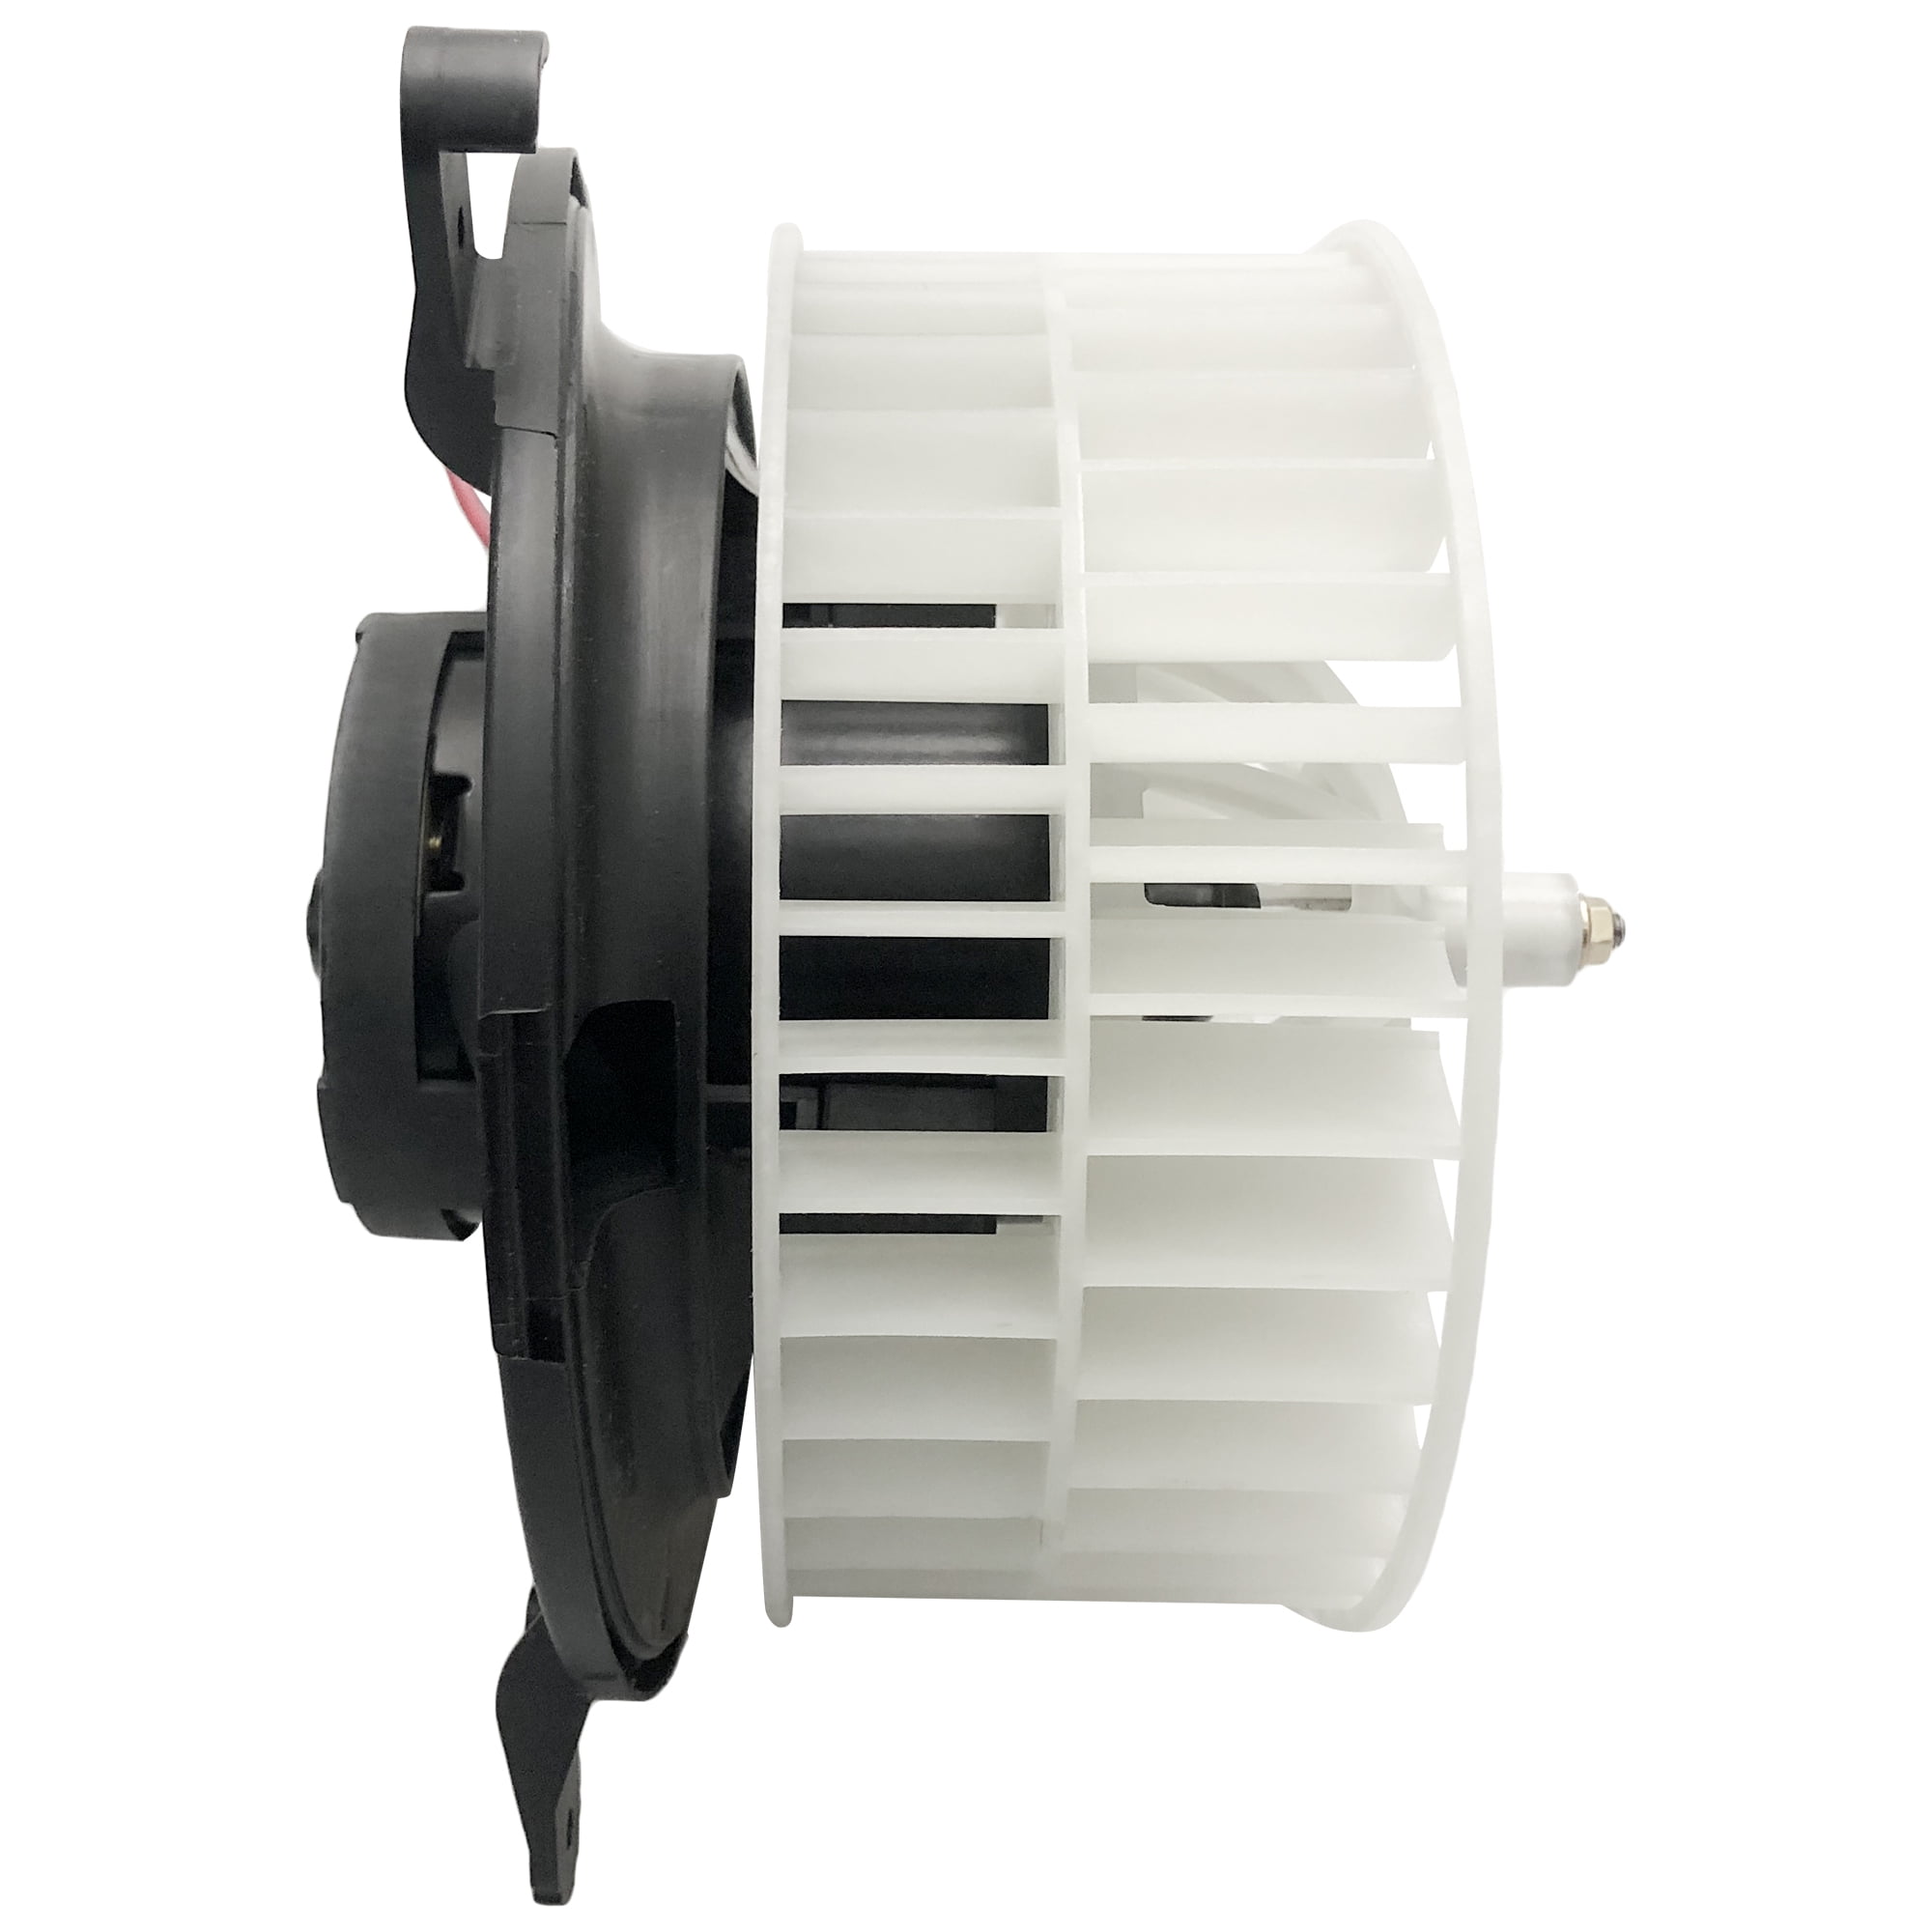 BOXI Blower Motor Fan Assembly for 2000-2006 Mercedes Benz CL500 S430 S500/ 2001-2006 Mercedes Benz CL55 CL600 S55 S600/ 2005-2006 Mercedes Benz CL65 AMG/ 2006 Mercedes Benz S350 S65 AMG 2208203142 